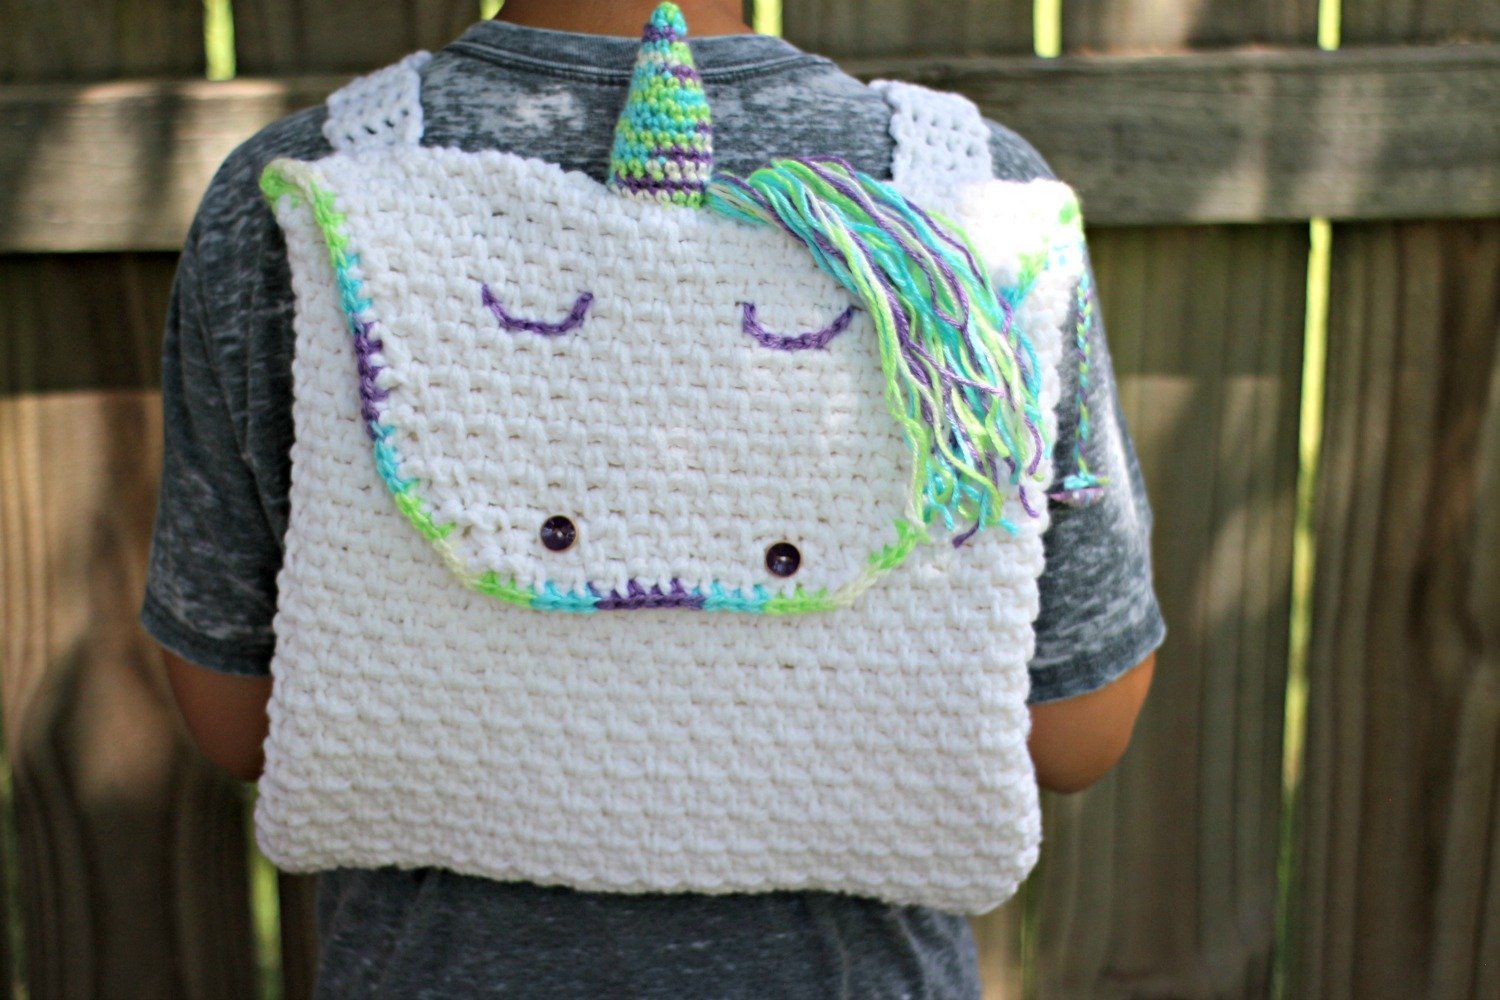 Crochet this easy and fast unicorn backpack with this free crochet pattern